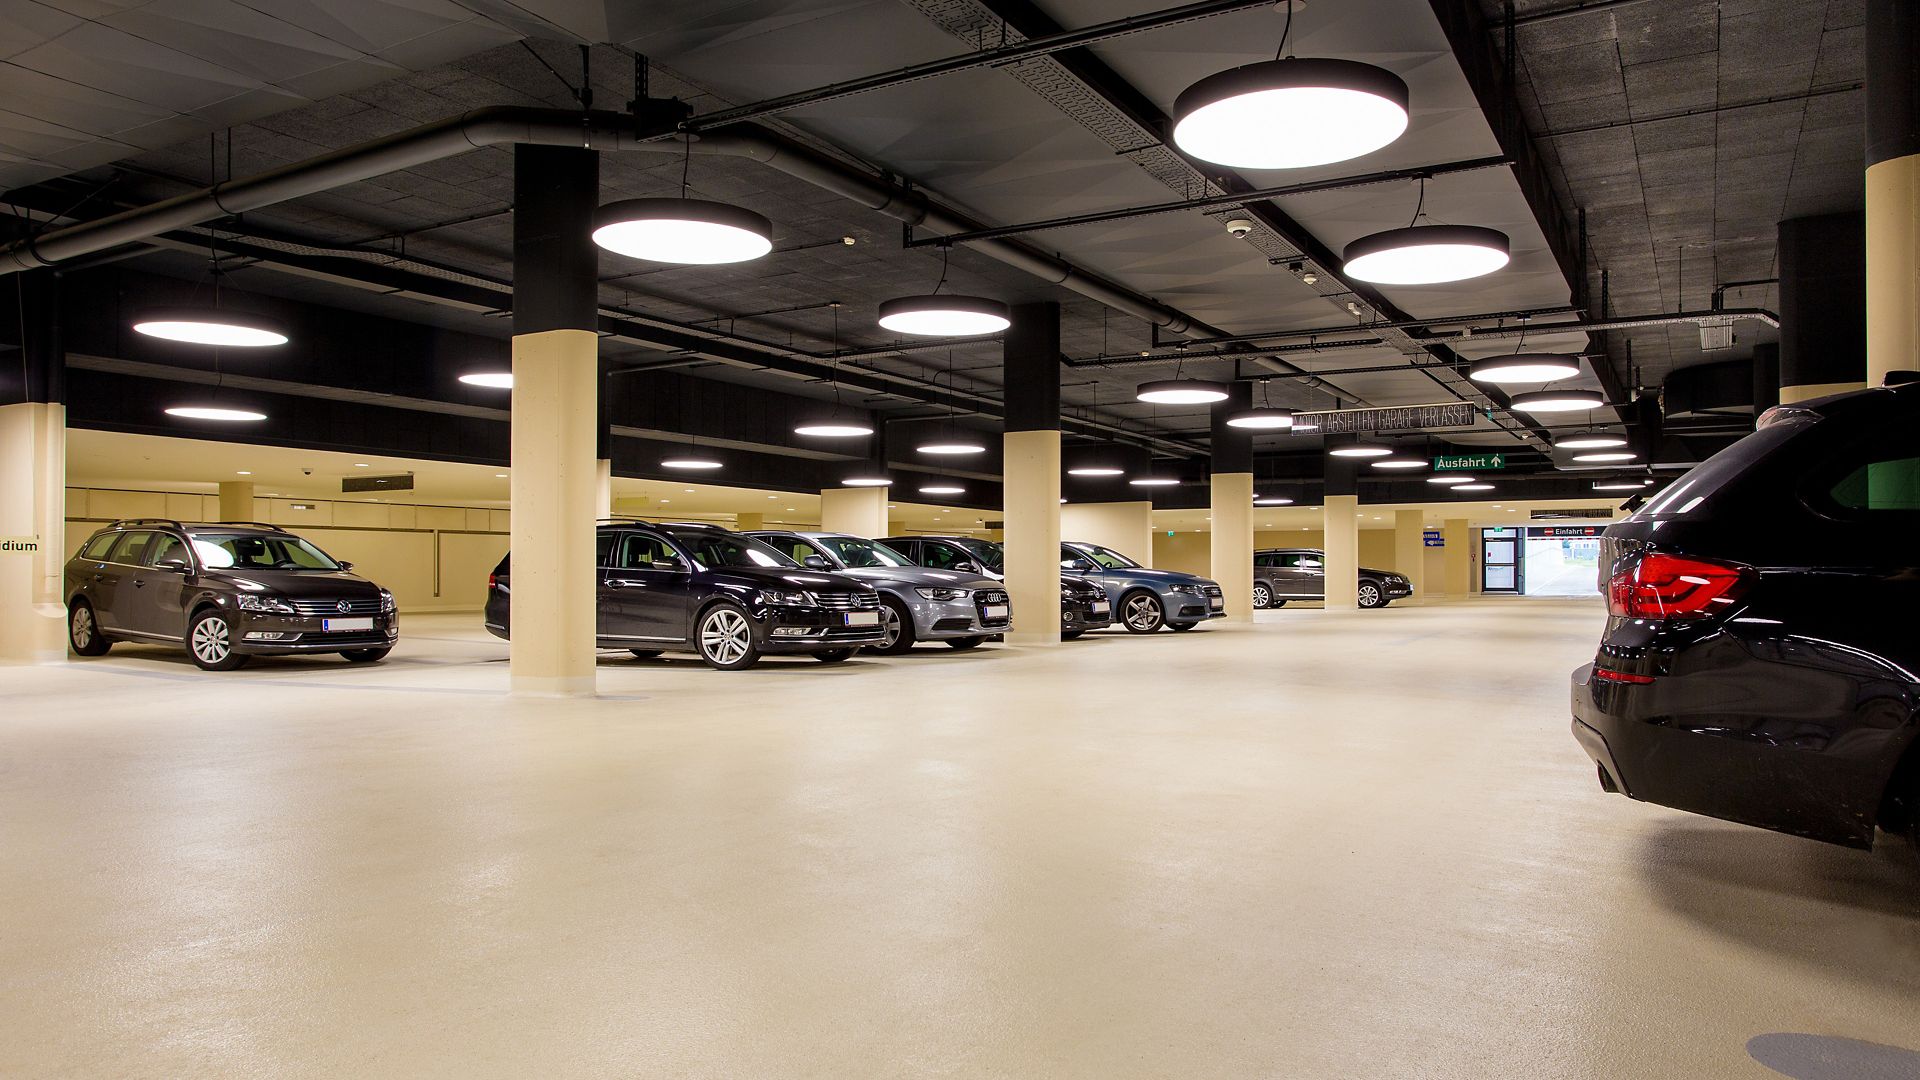 Cars in indoor parking garage made with Sikafloor coating system